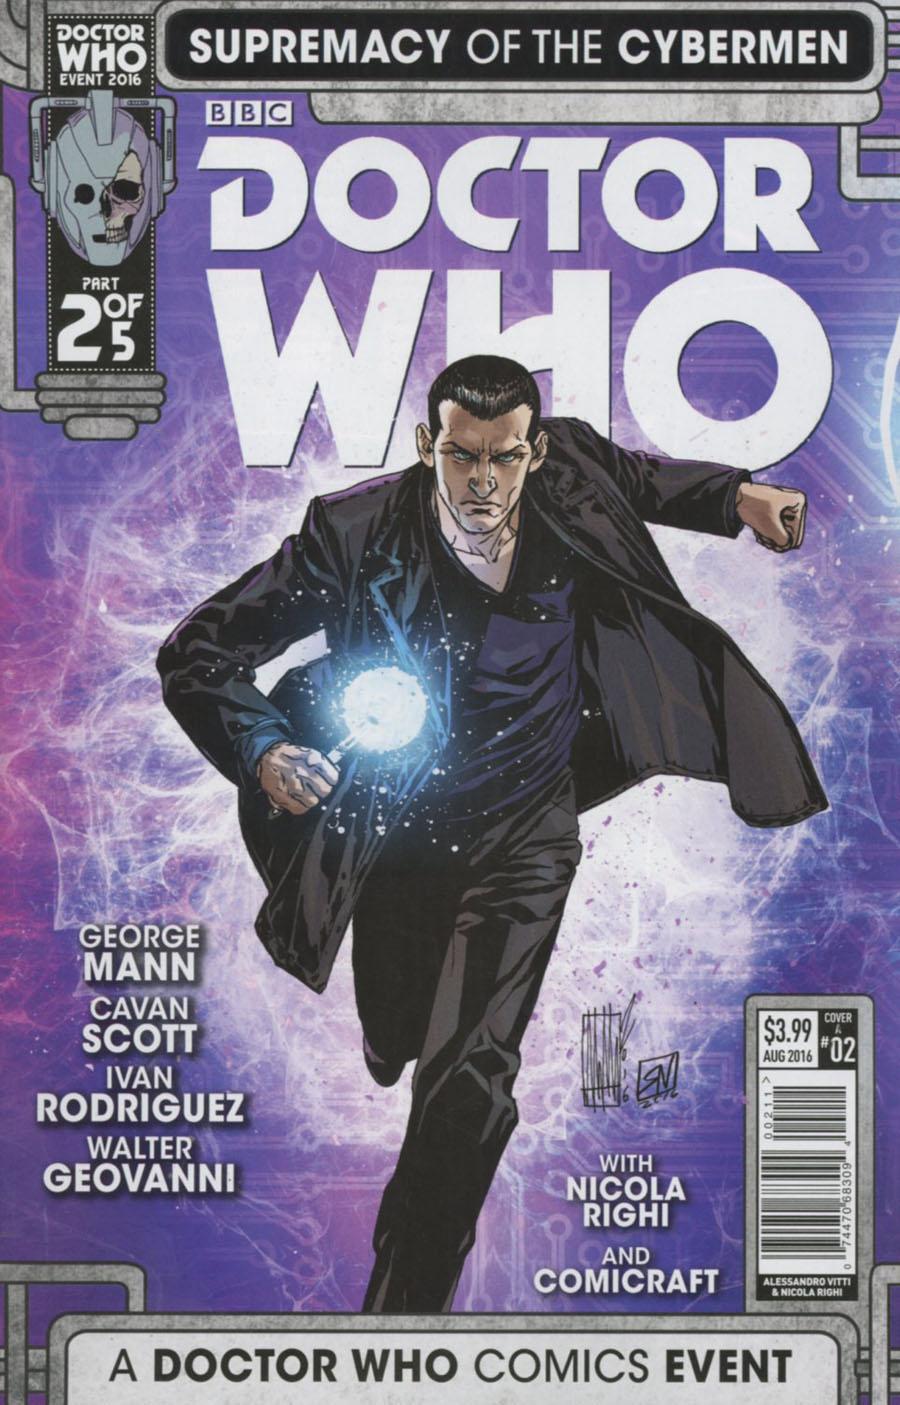 Doctor Who Event 2016 Supremacy Of The Cybermen Vol. 1 #2